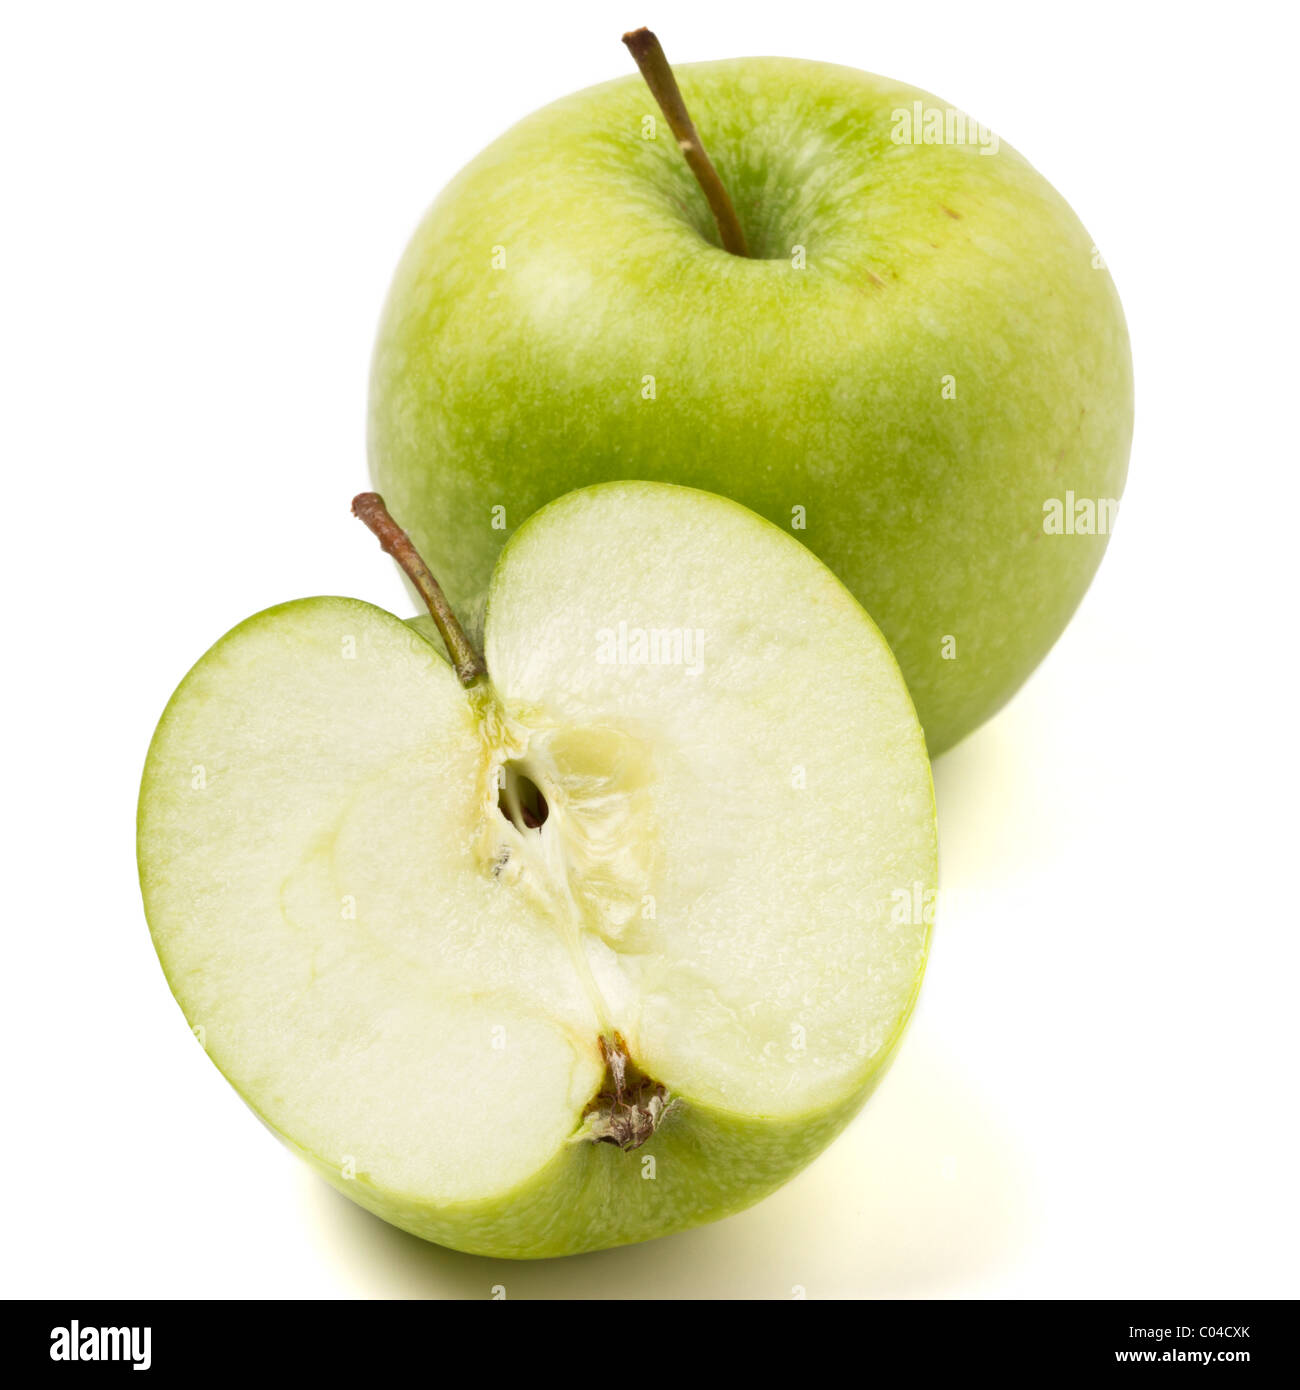 Granny Smith variety of apple from low perspective isolated on white. Stock Photo